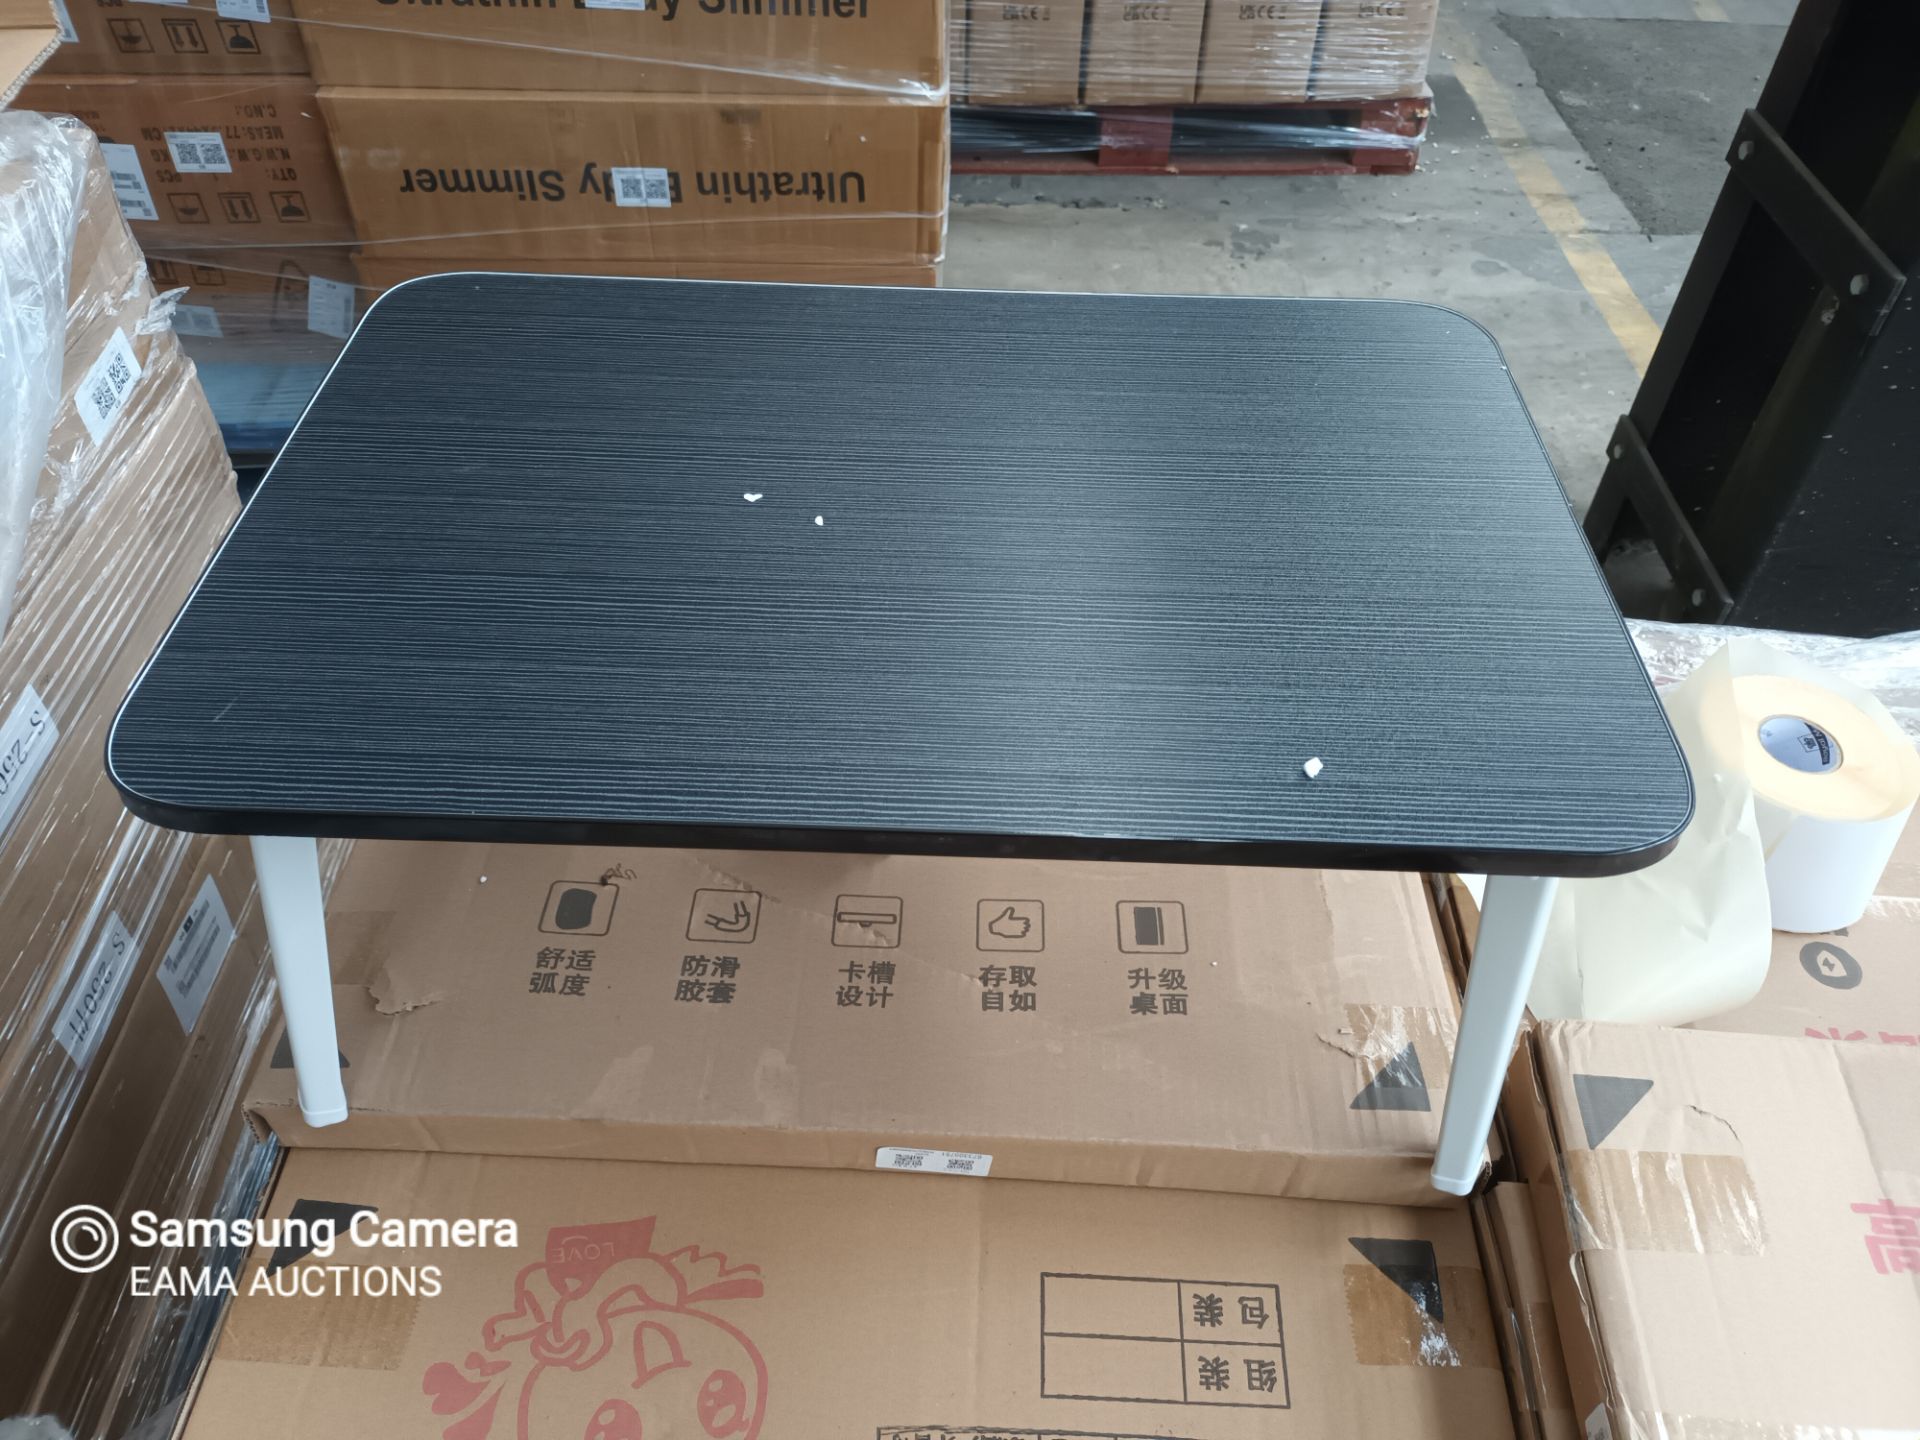 L49 - 1 PALLET CONTAINING APPROX 39 SMALL BLACK TABLES WITH WHITE METAL LEGS TABLES